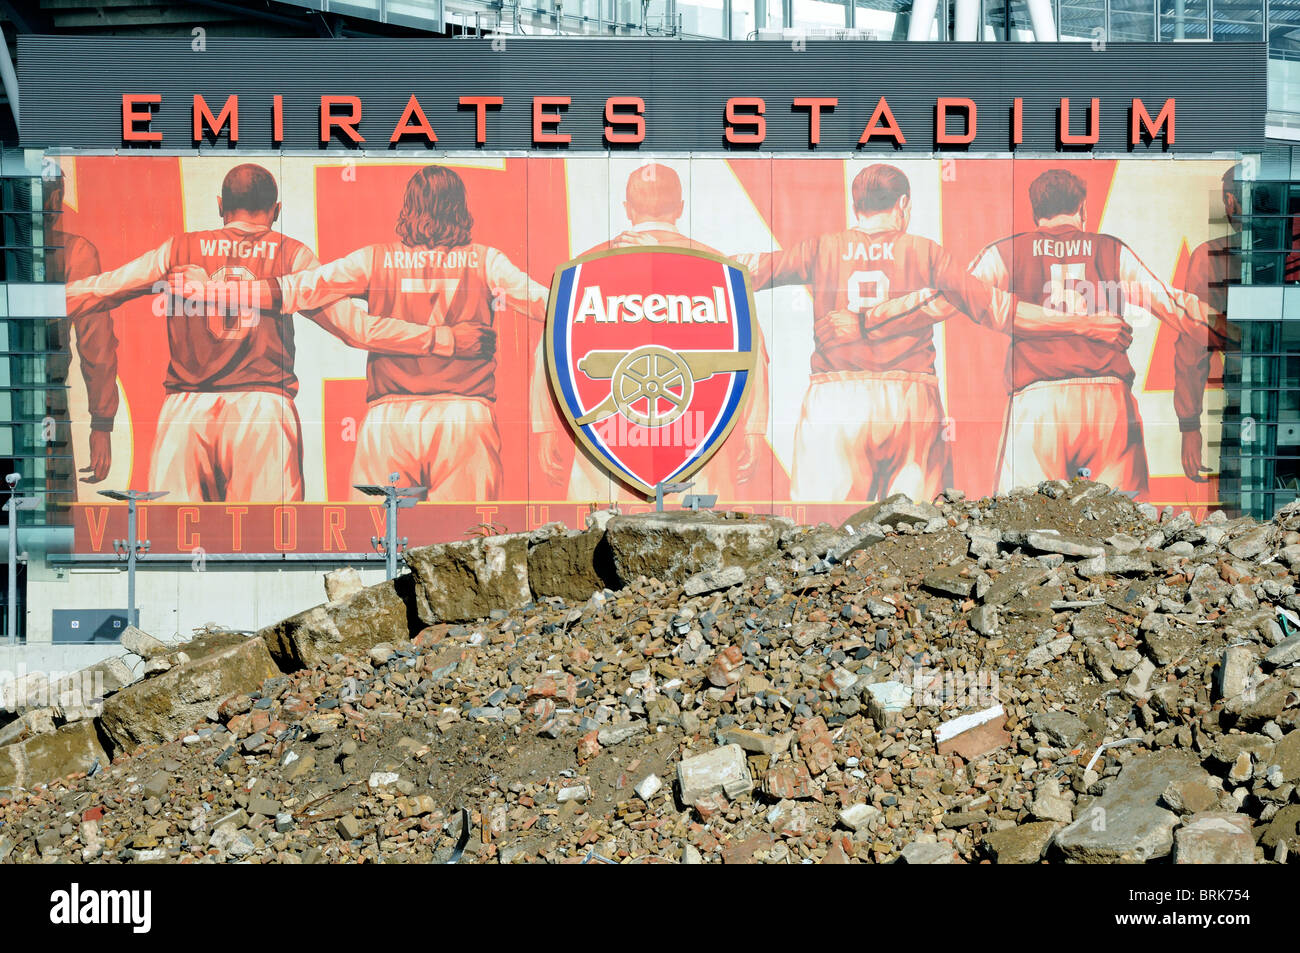 Emirates Stadium with rubble in front from the Queensland Road development, Holloway Islington London England UK Stock Photo